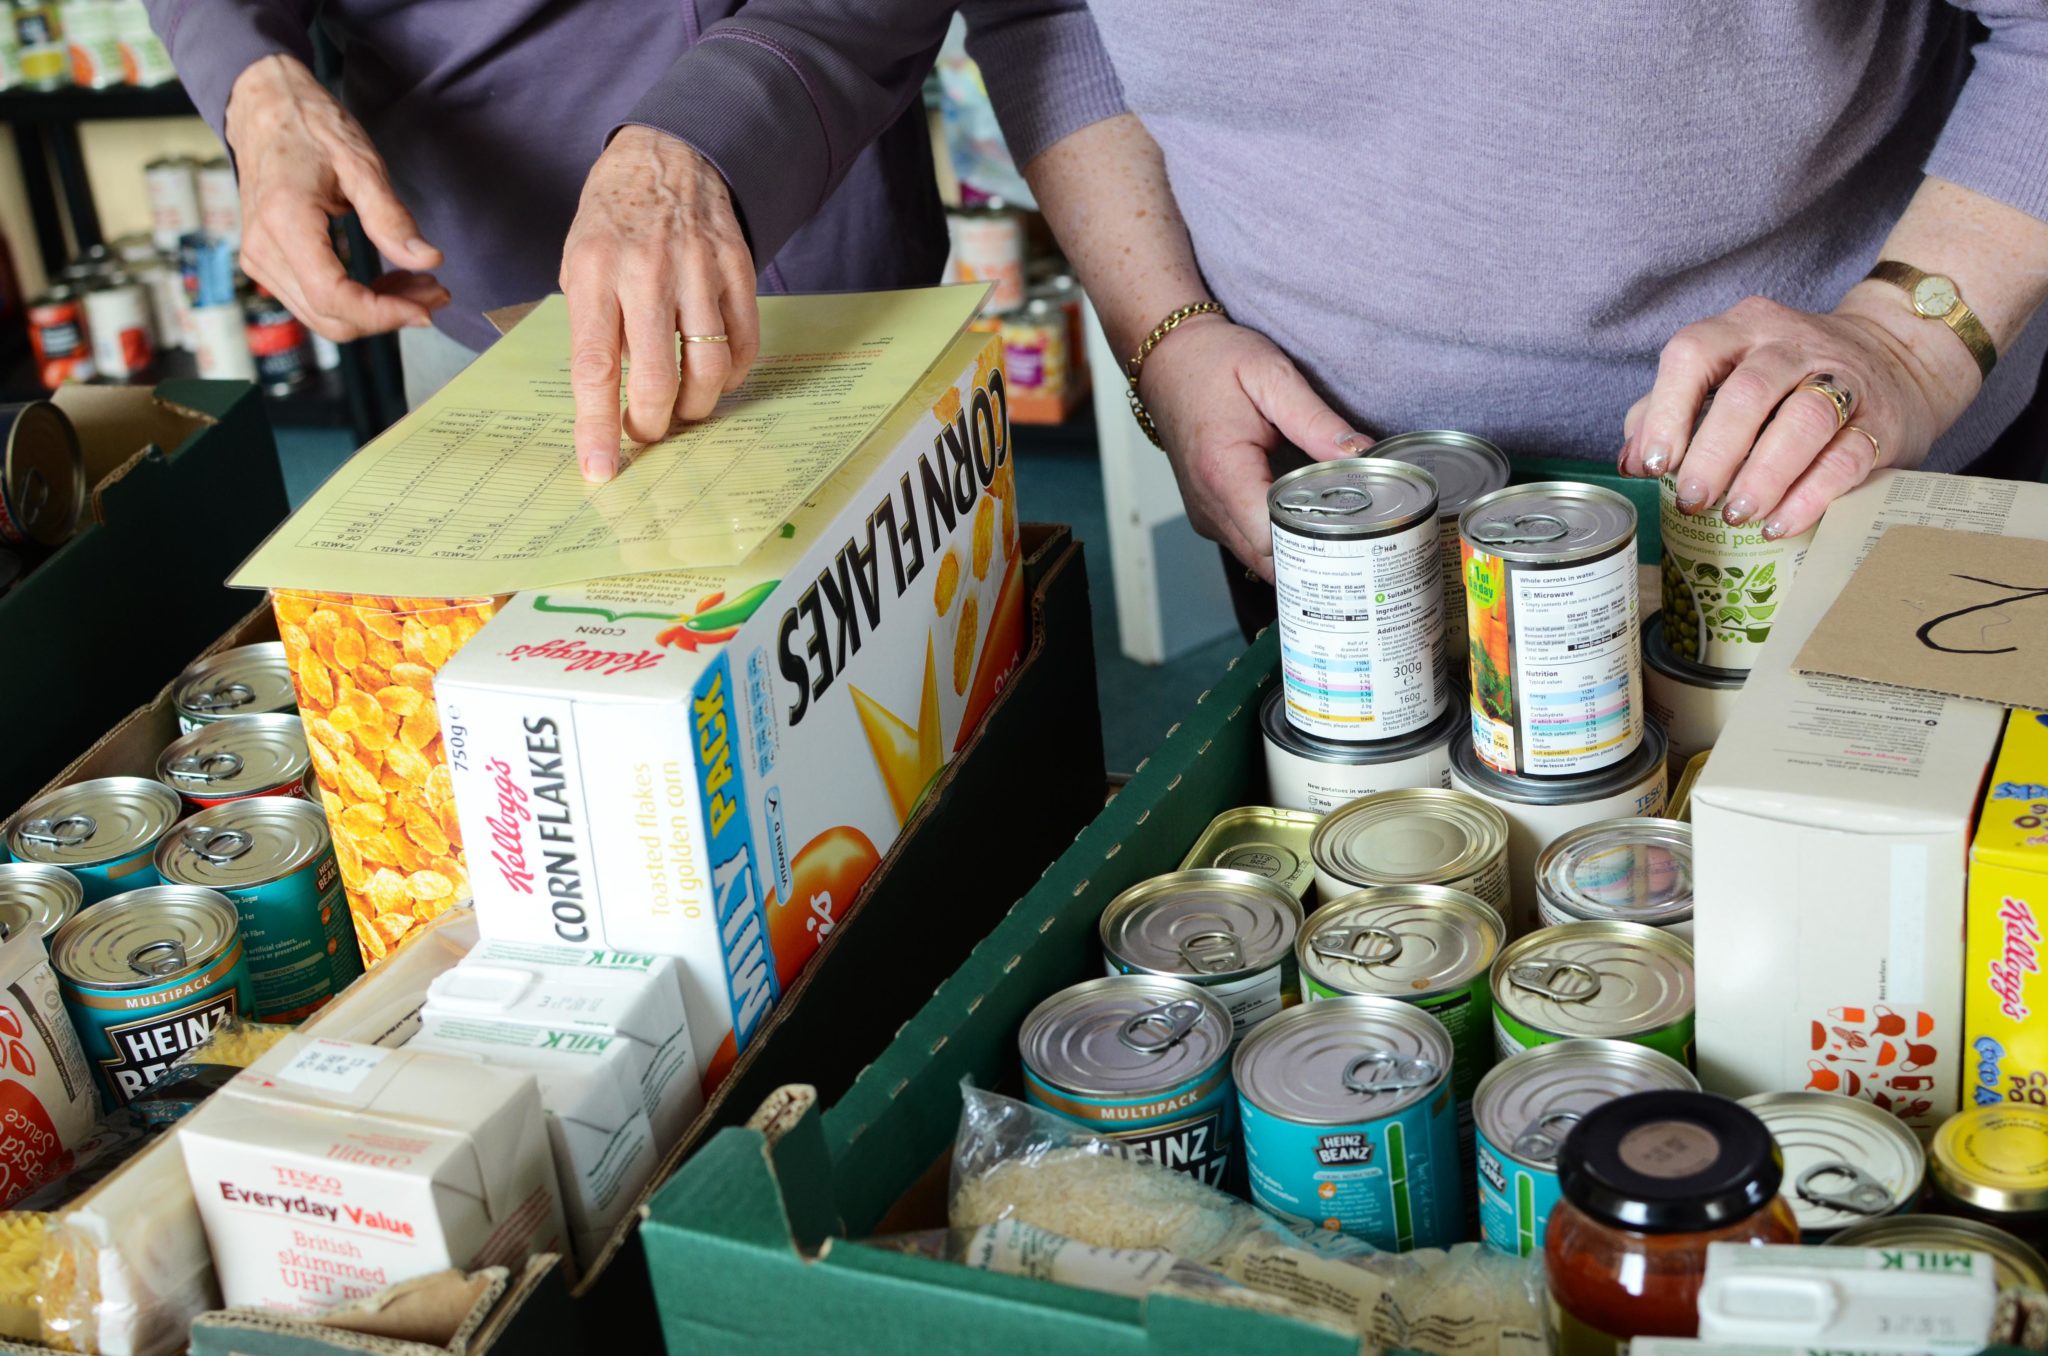 Workers are seen at a food bank in May 2013.